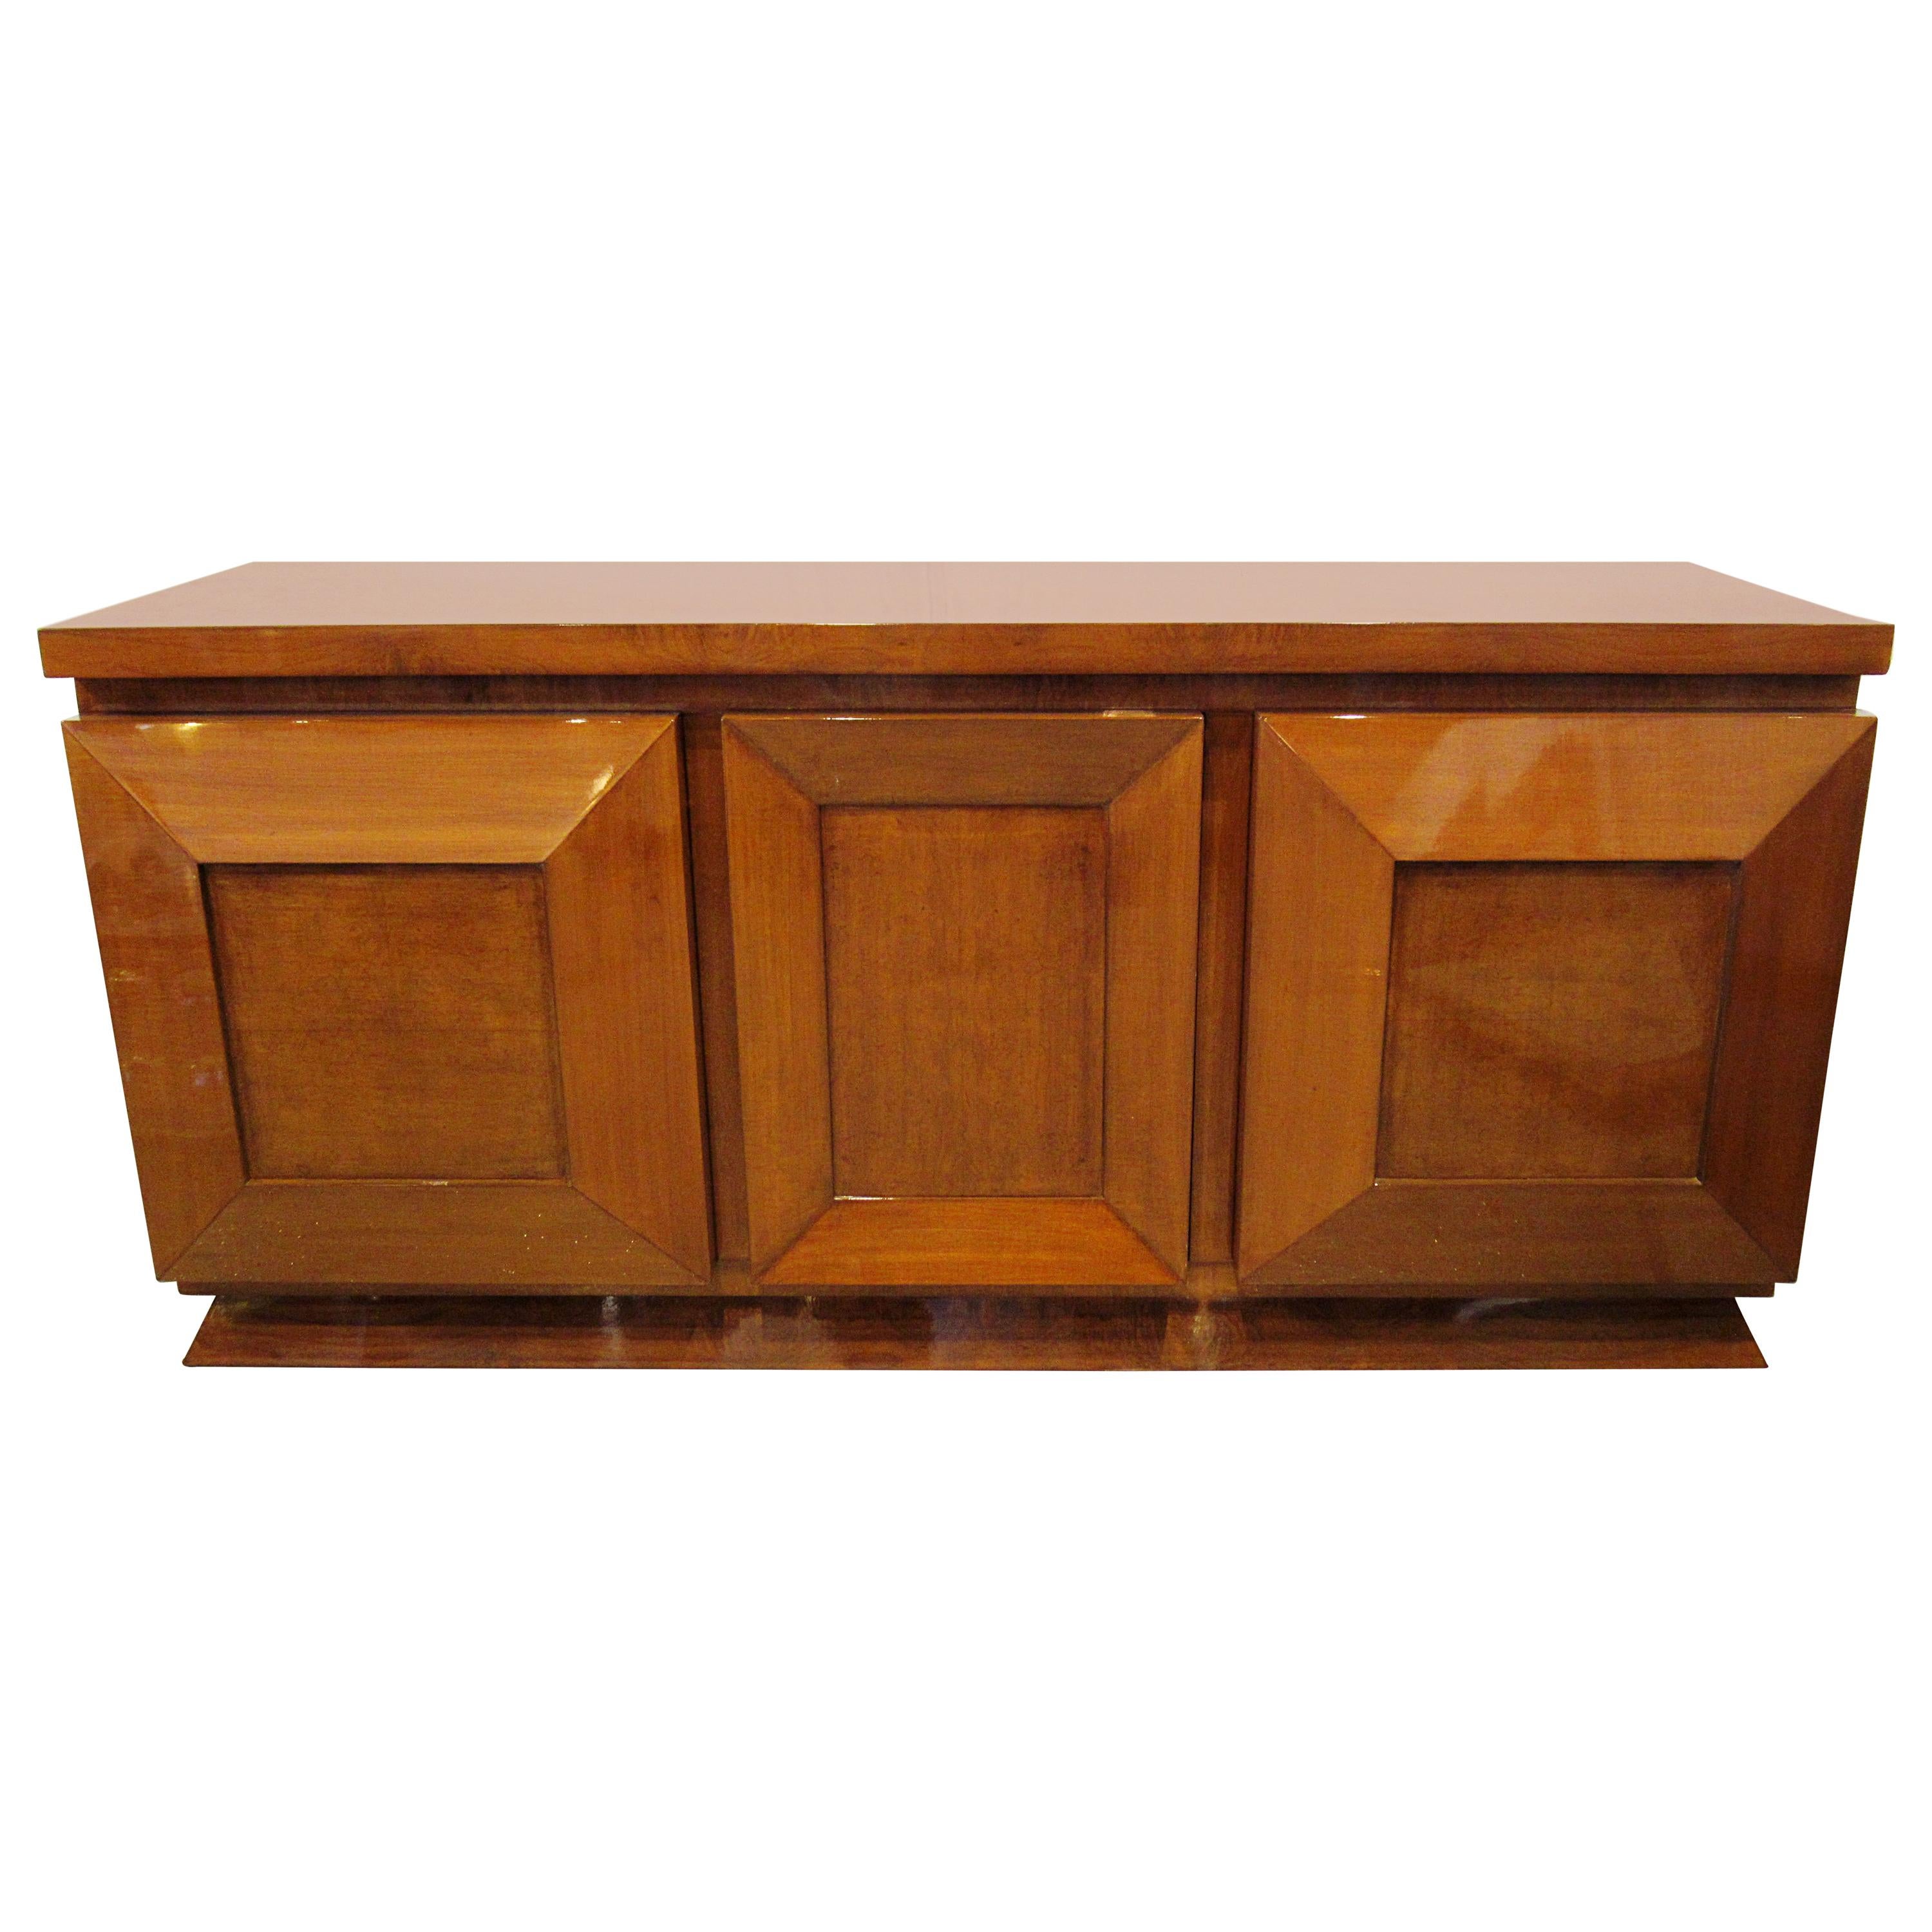 French Late Art Deco Burl Walnut Three-Door Credenza or Buffet, Andre Sornay